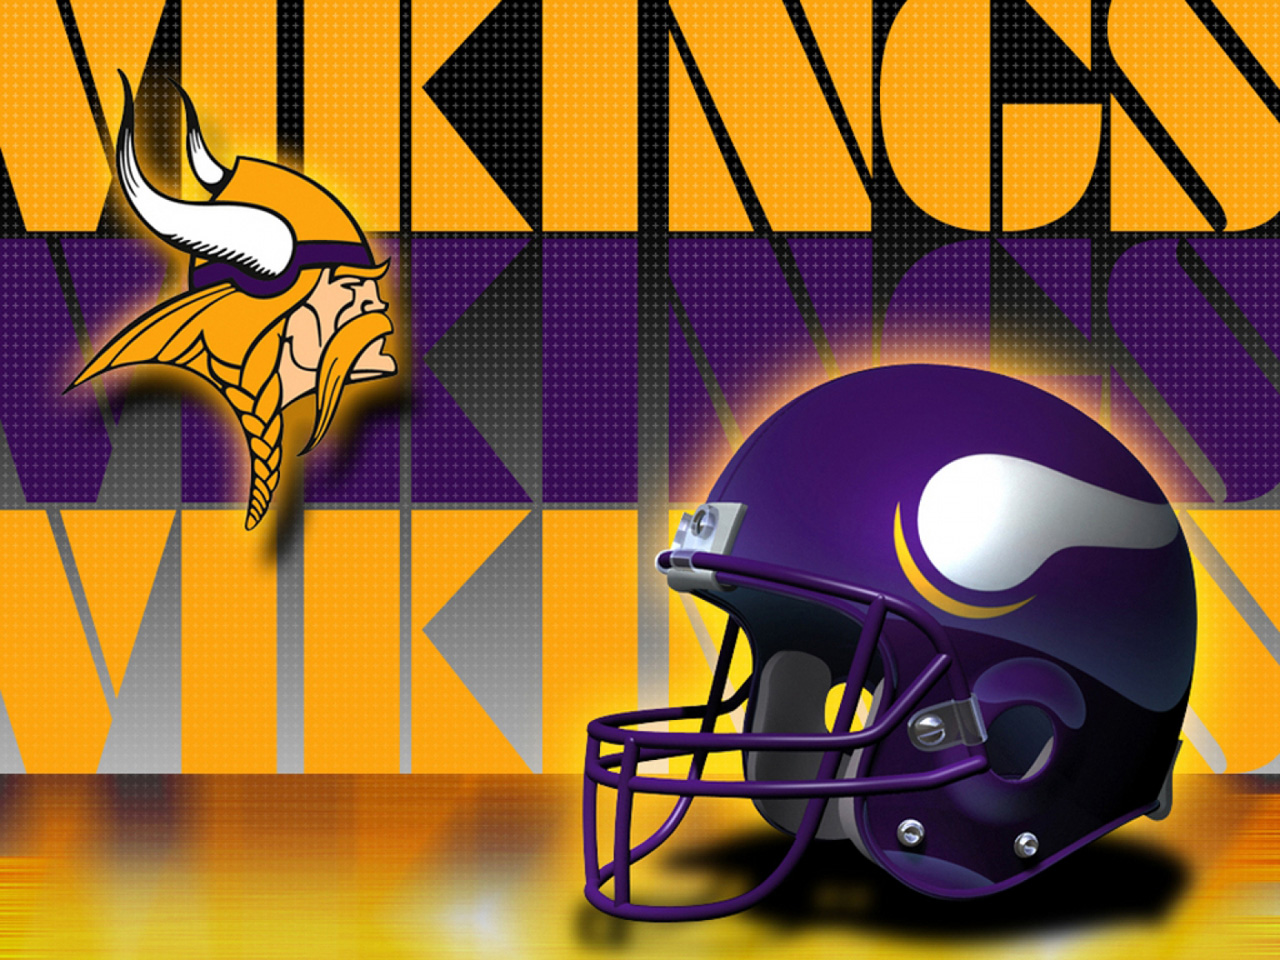 Out These Vikings iPhone Wallpaper And iPad